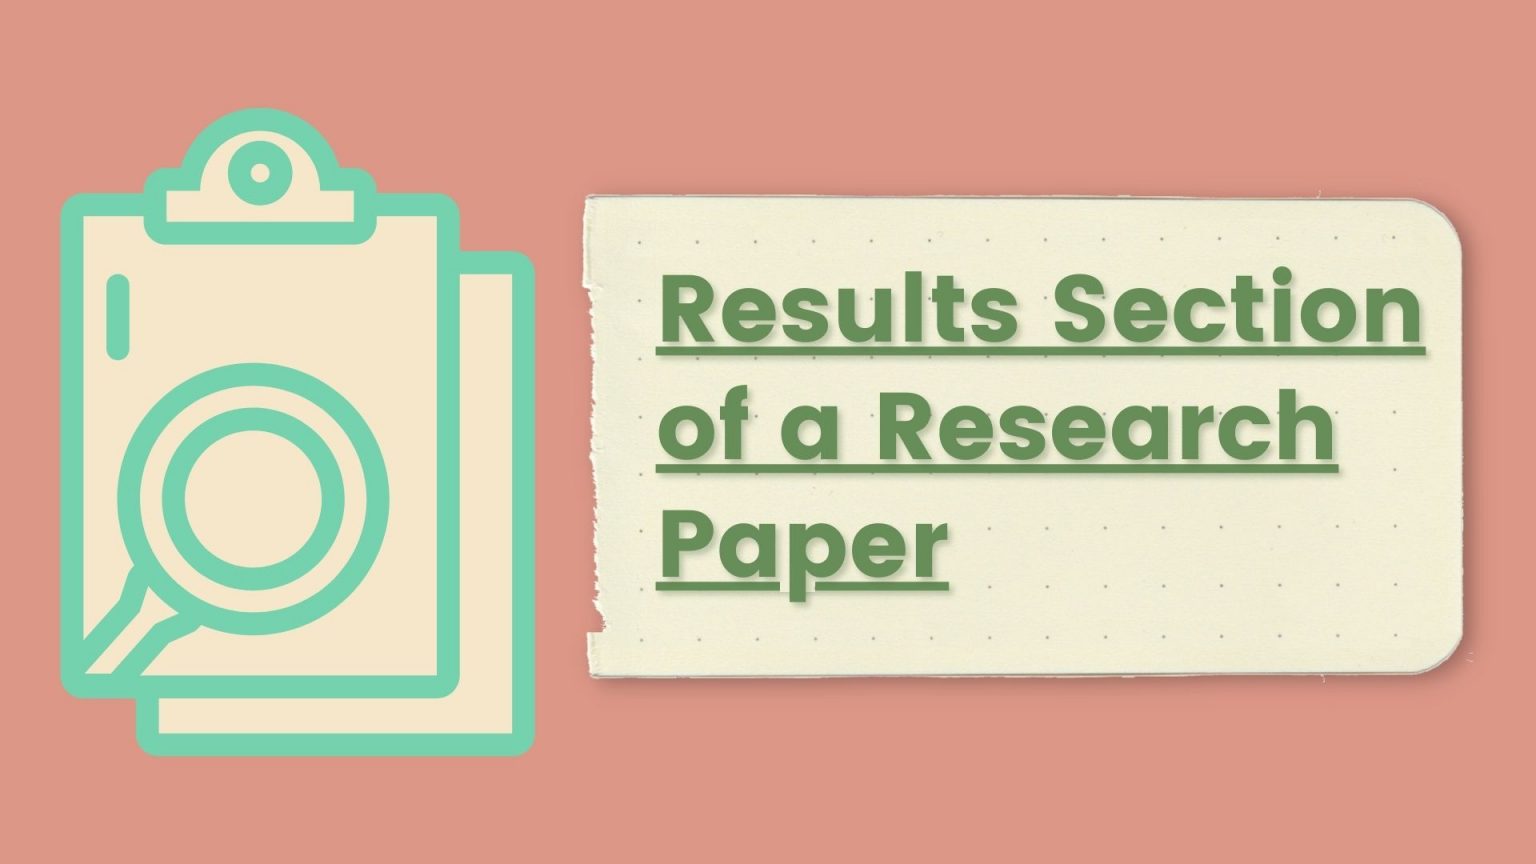 the results section of a research article typically ____